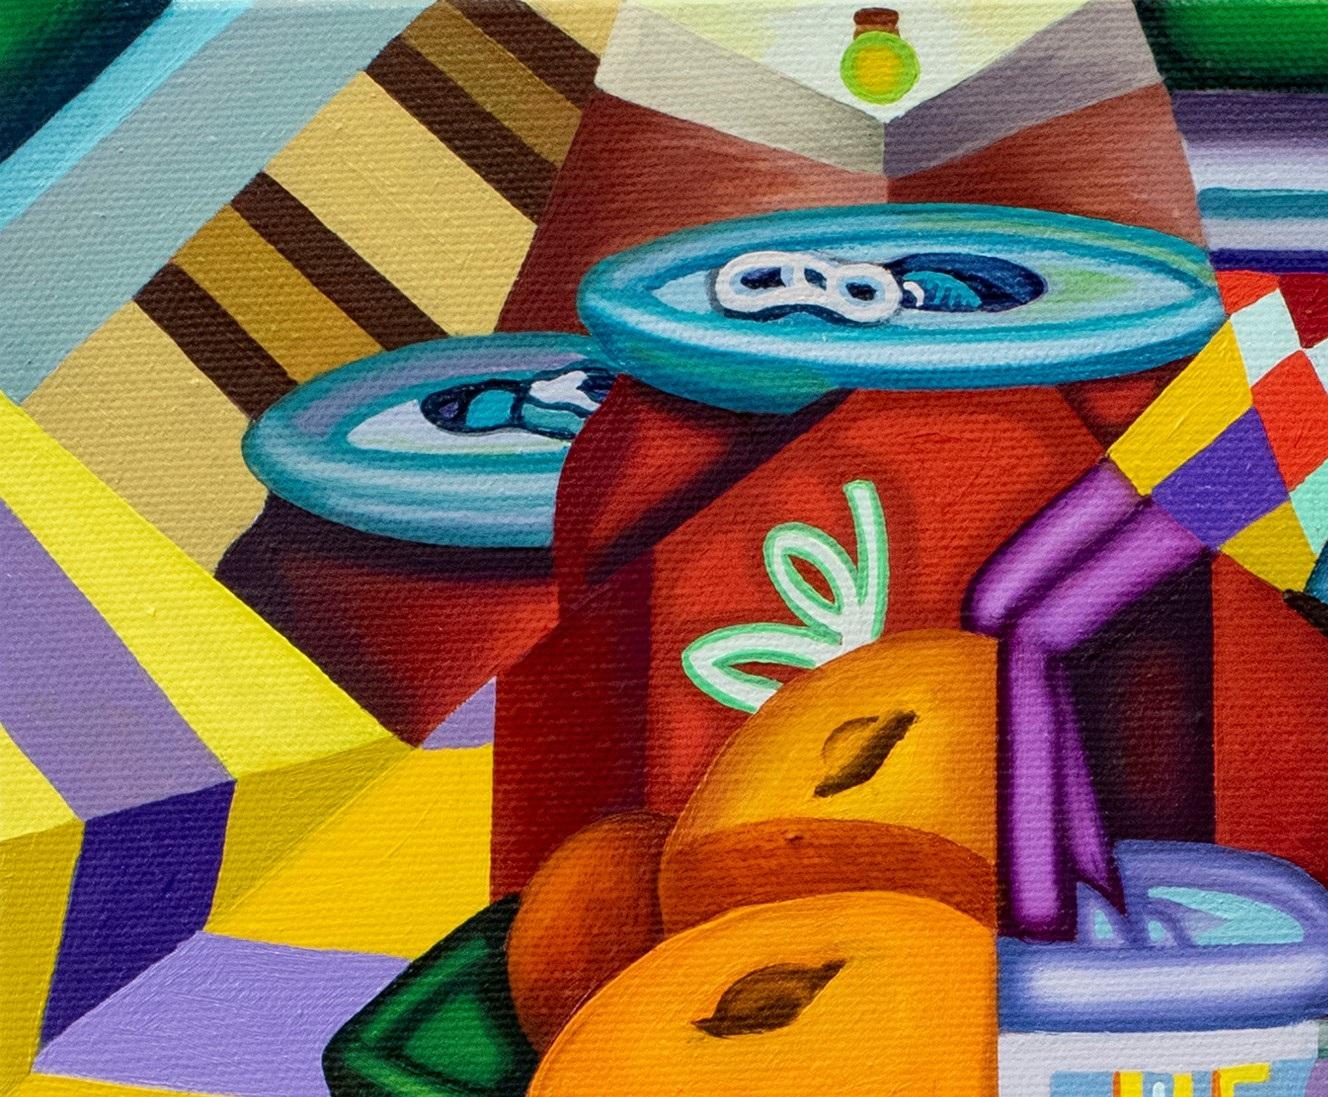 Olè Setting - Cubist, Bright & Bold Surreal Table with Fruit and Soda, Oranges - Painting by Jason Stout